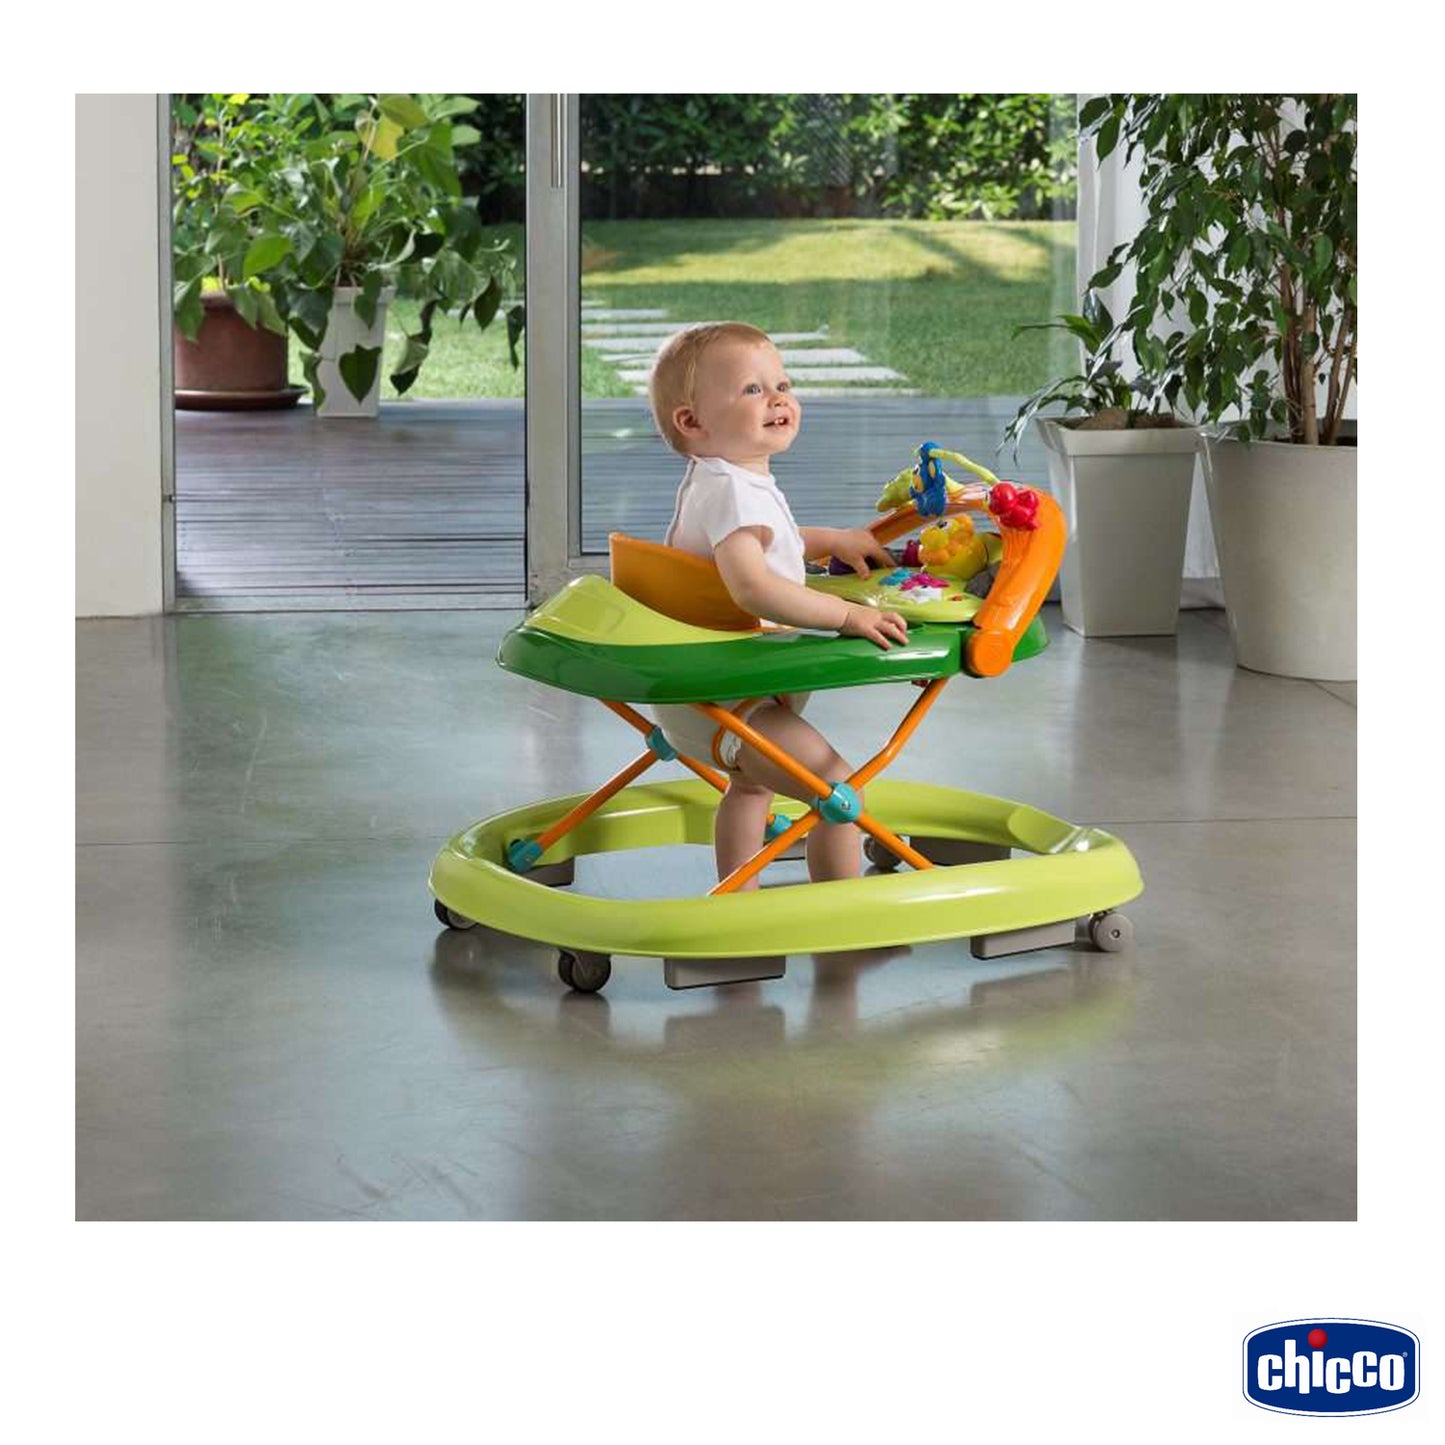 Chicco - Walky Talky baby walker